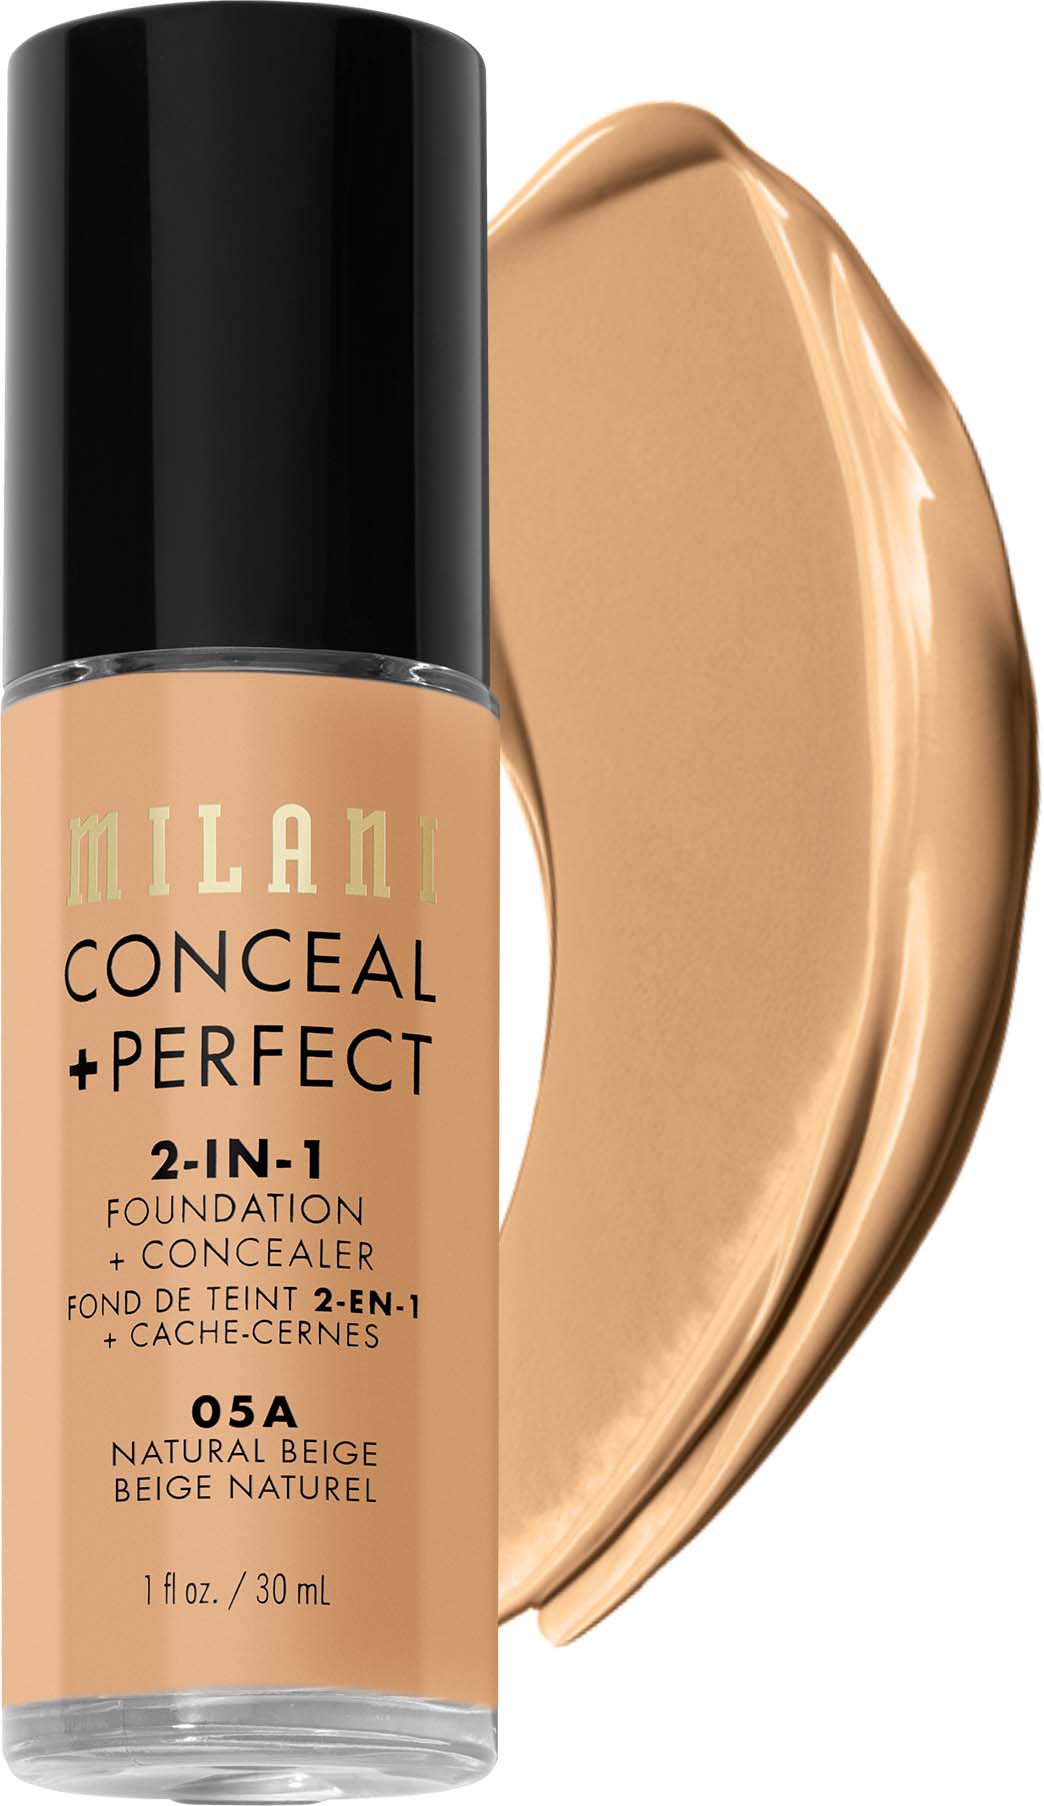 Milani Conceal & Perfect 2-in-1 foundation Natural Beige lyko.com